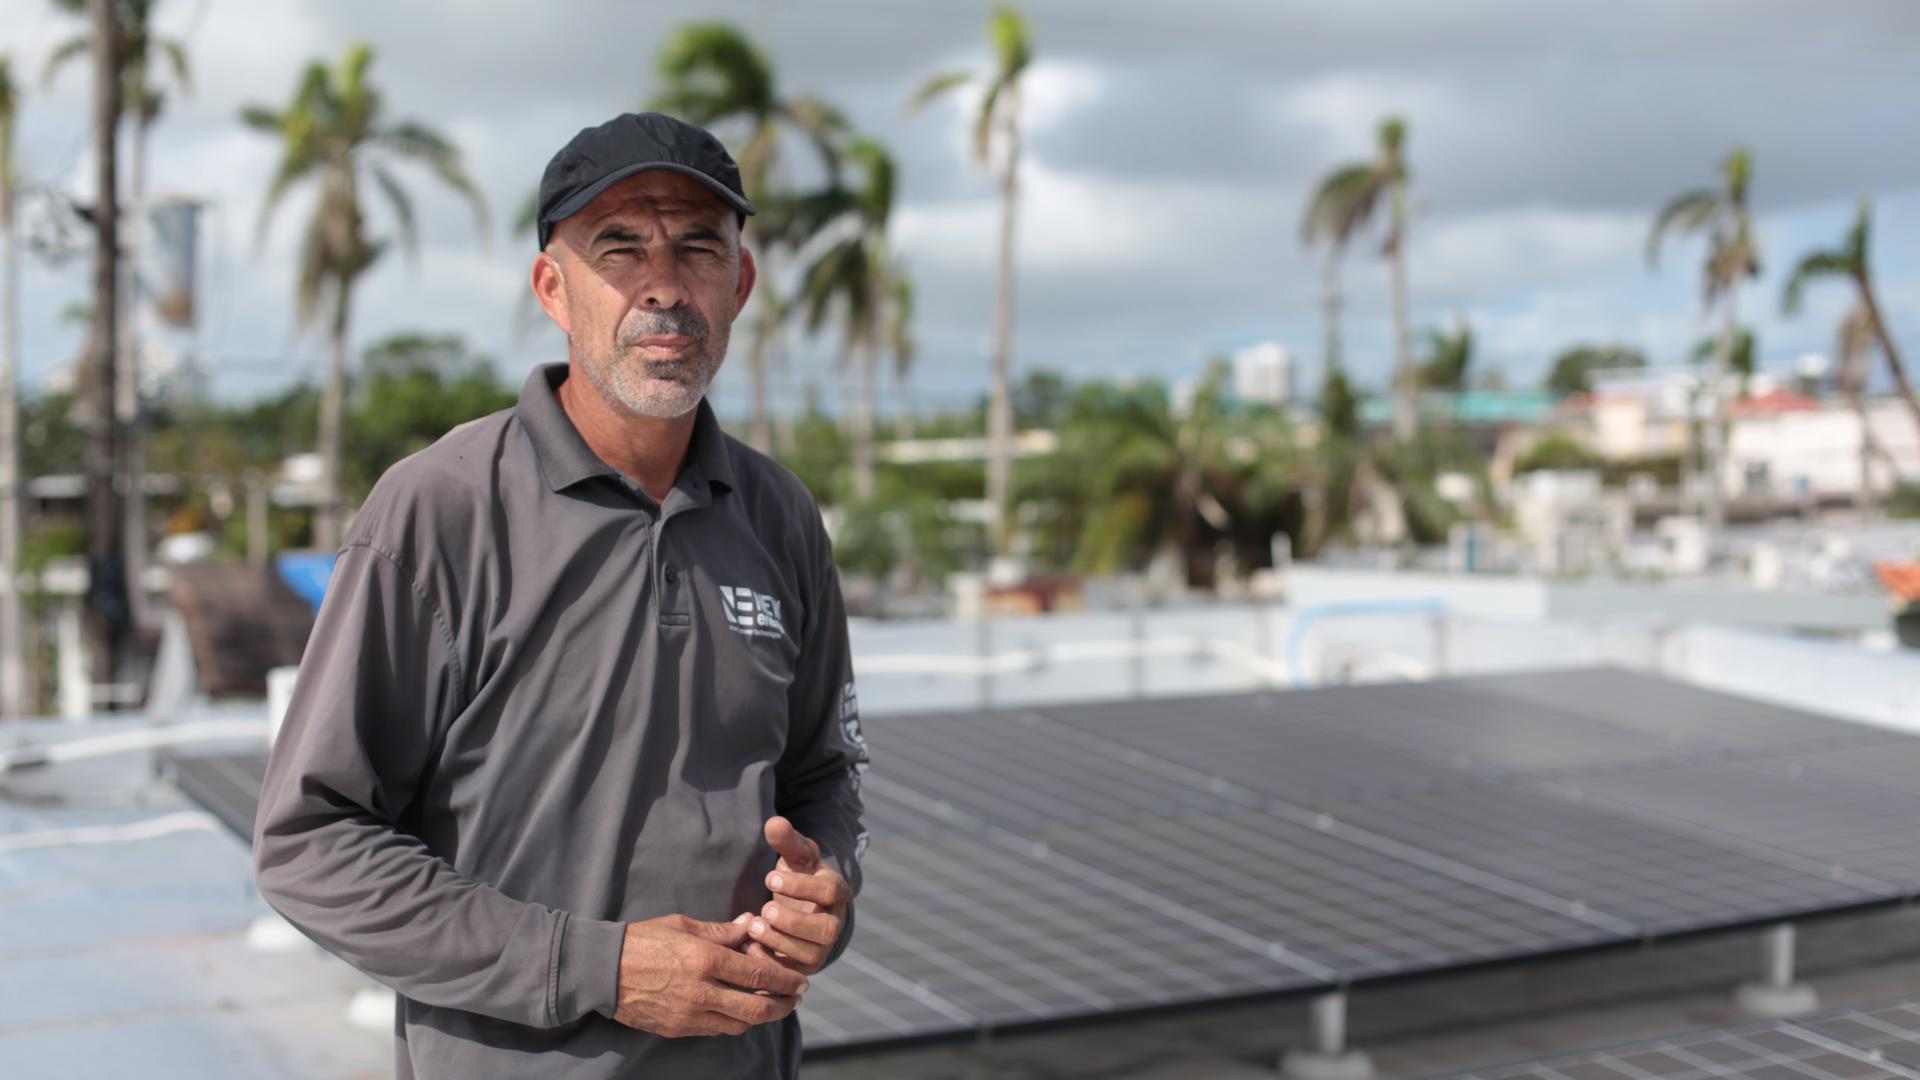 Technician Alexis Portalatin stands next to rooftop solar panels he is connecting to a new Tesla battery storage system the San Juan suburb of Guaynabo. The storage system will allow the panels to operate separately from the power grid and supply electric